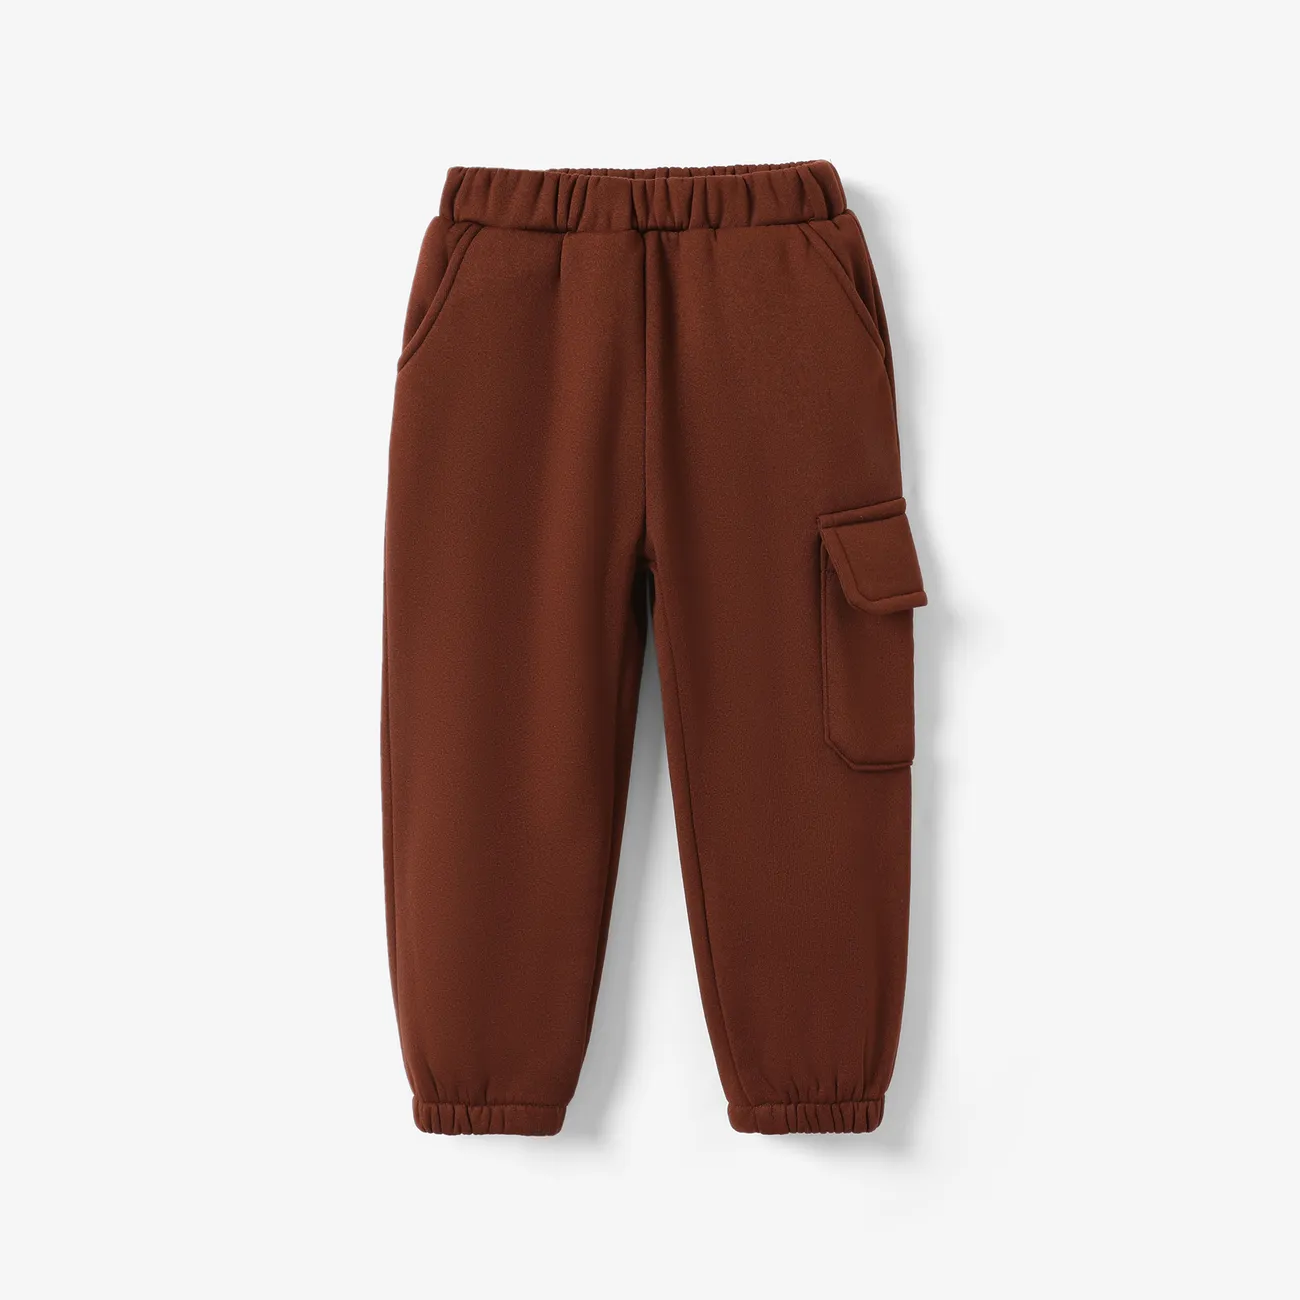 Boy's Loose Casual Pants with Patch Pocket - 1pc, Polyester-Spandex Blend, Solid Color Brown big image 1